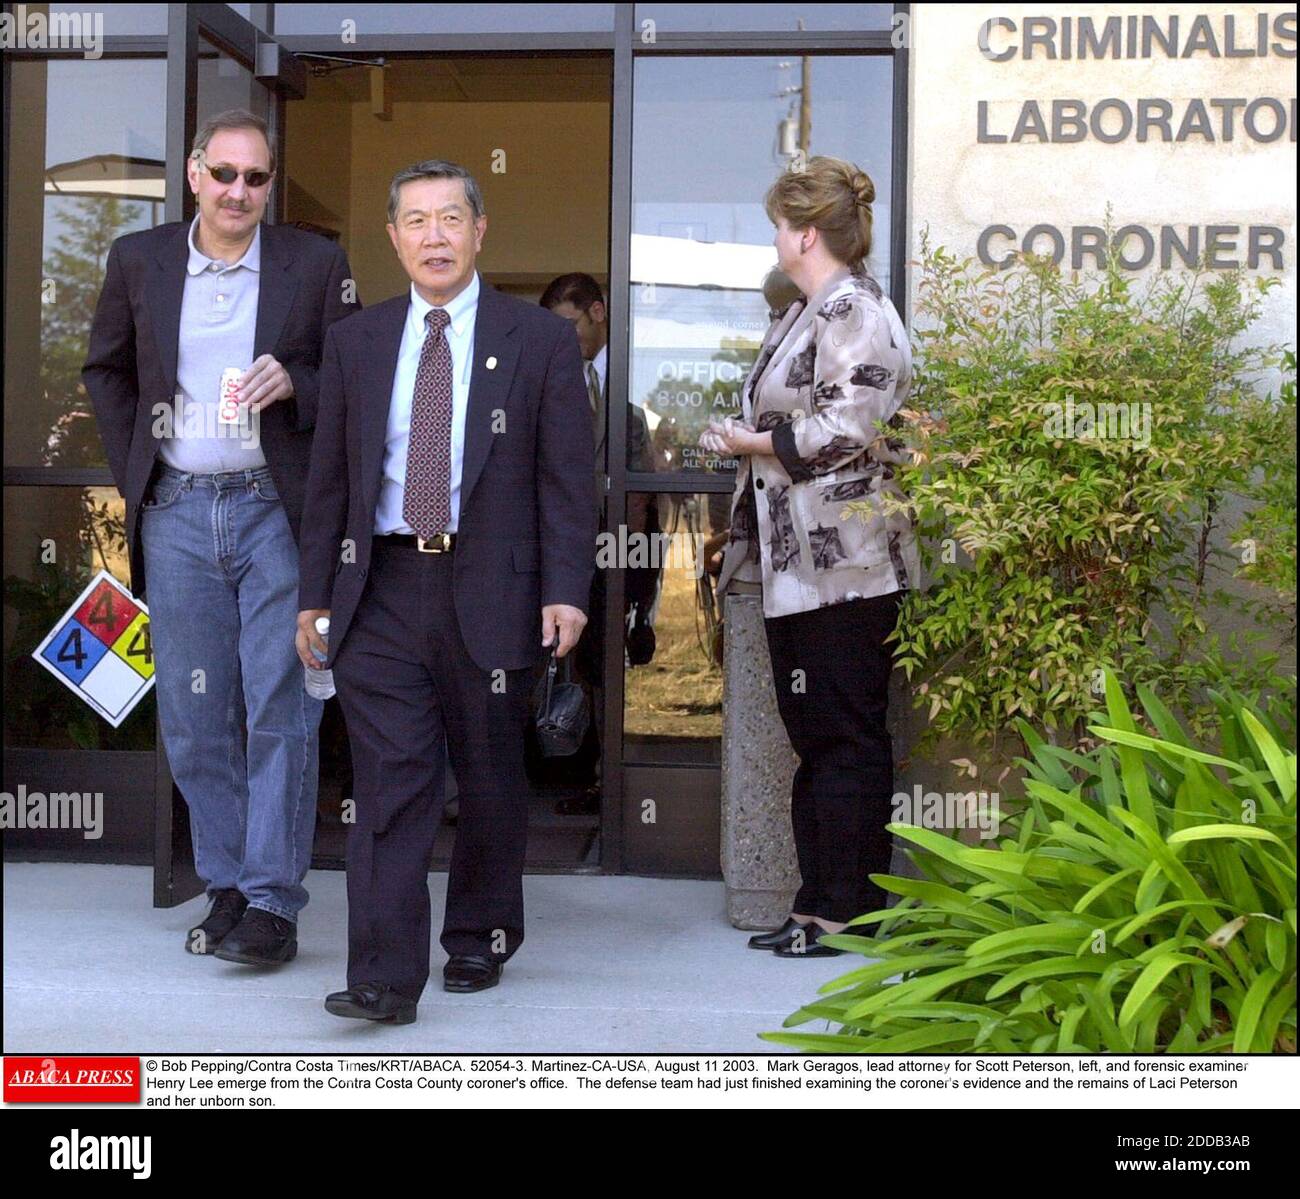 NO FILM, NO VIDEO, NO TV, NO DOCUMENTARY - © Bob Pepping/Contra Costa Times/KRT/ABACA. 52054-3. Martinez-CA-USA, August 11 2003. Mark Geragos, lead attorney for Scott Peterson, left, and forensic examiner Henry Lee emerge from the Contra Costa County coroner's office. The defense team had just fin Stock Photo